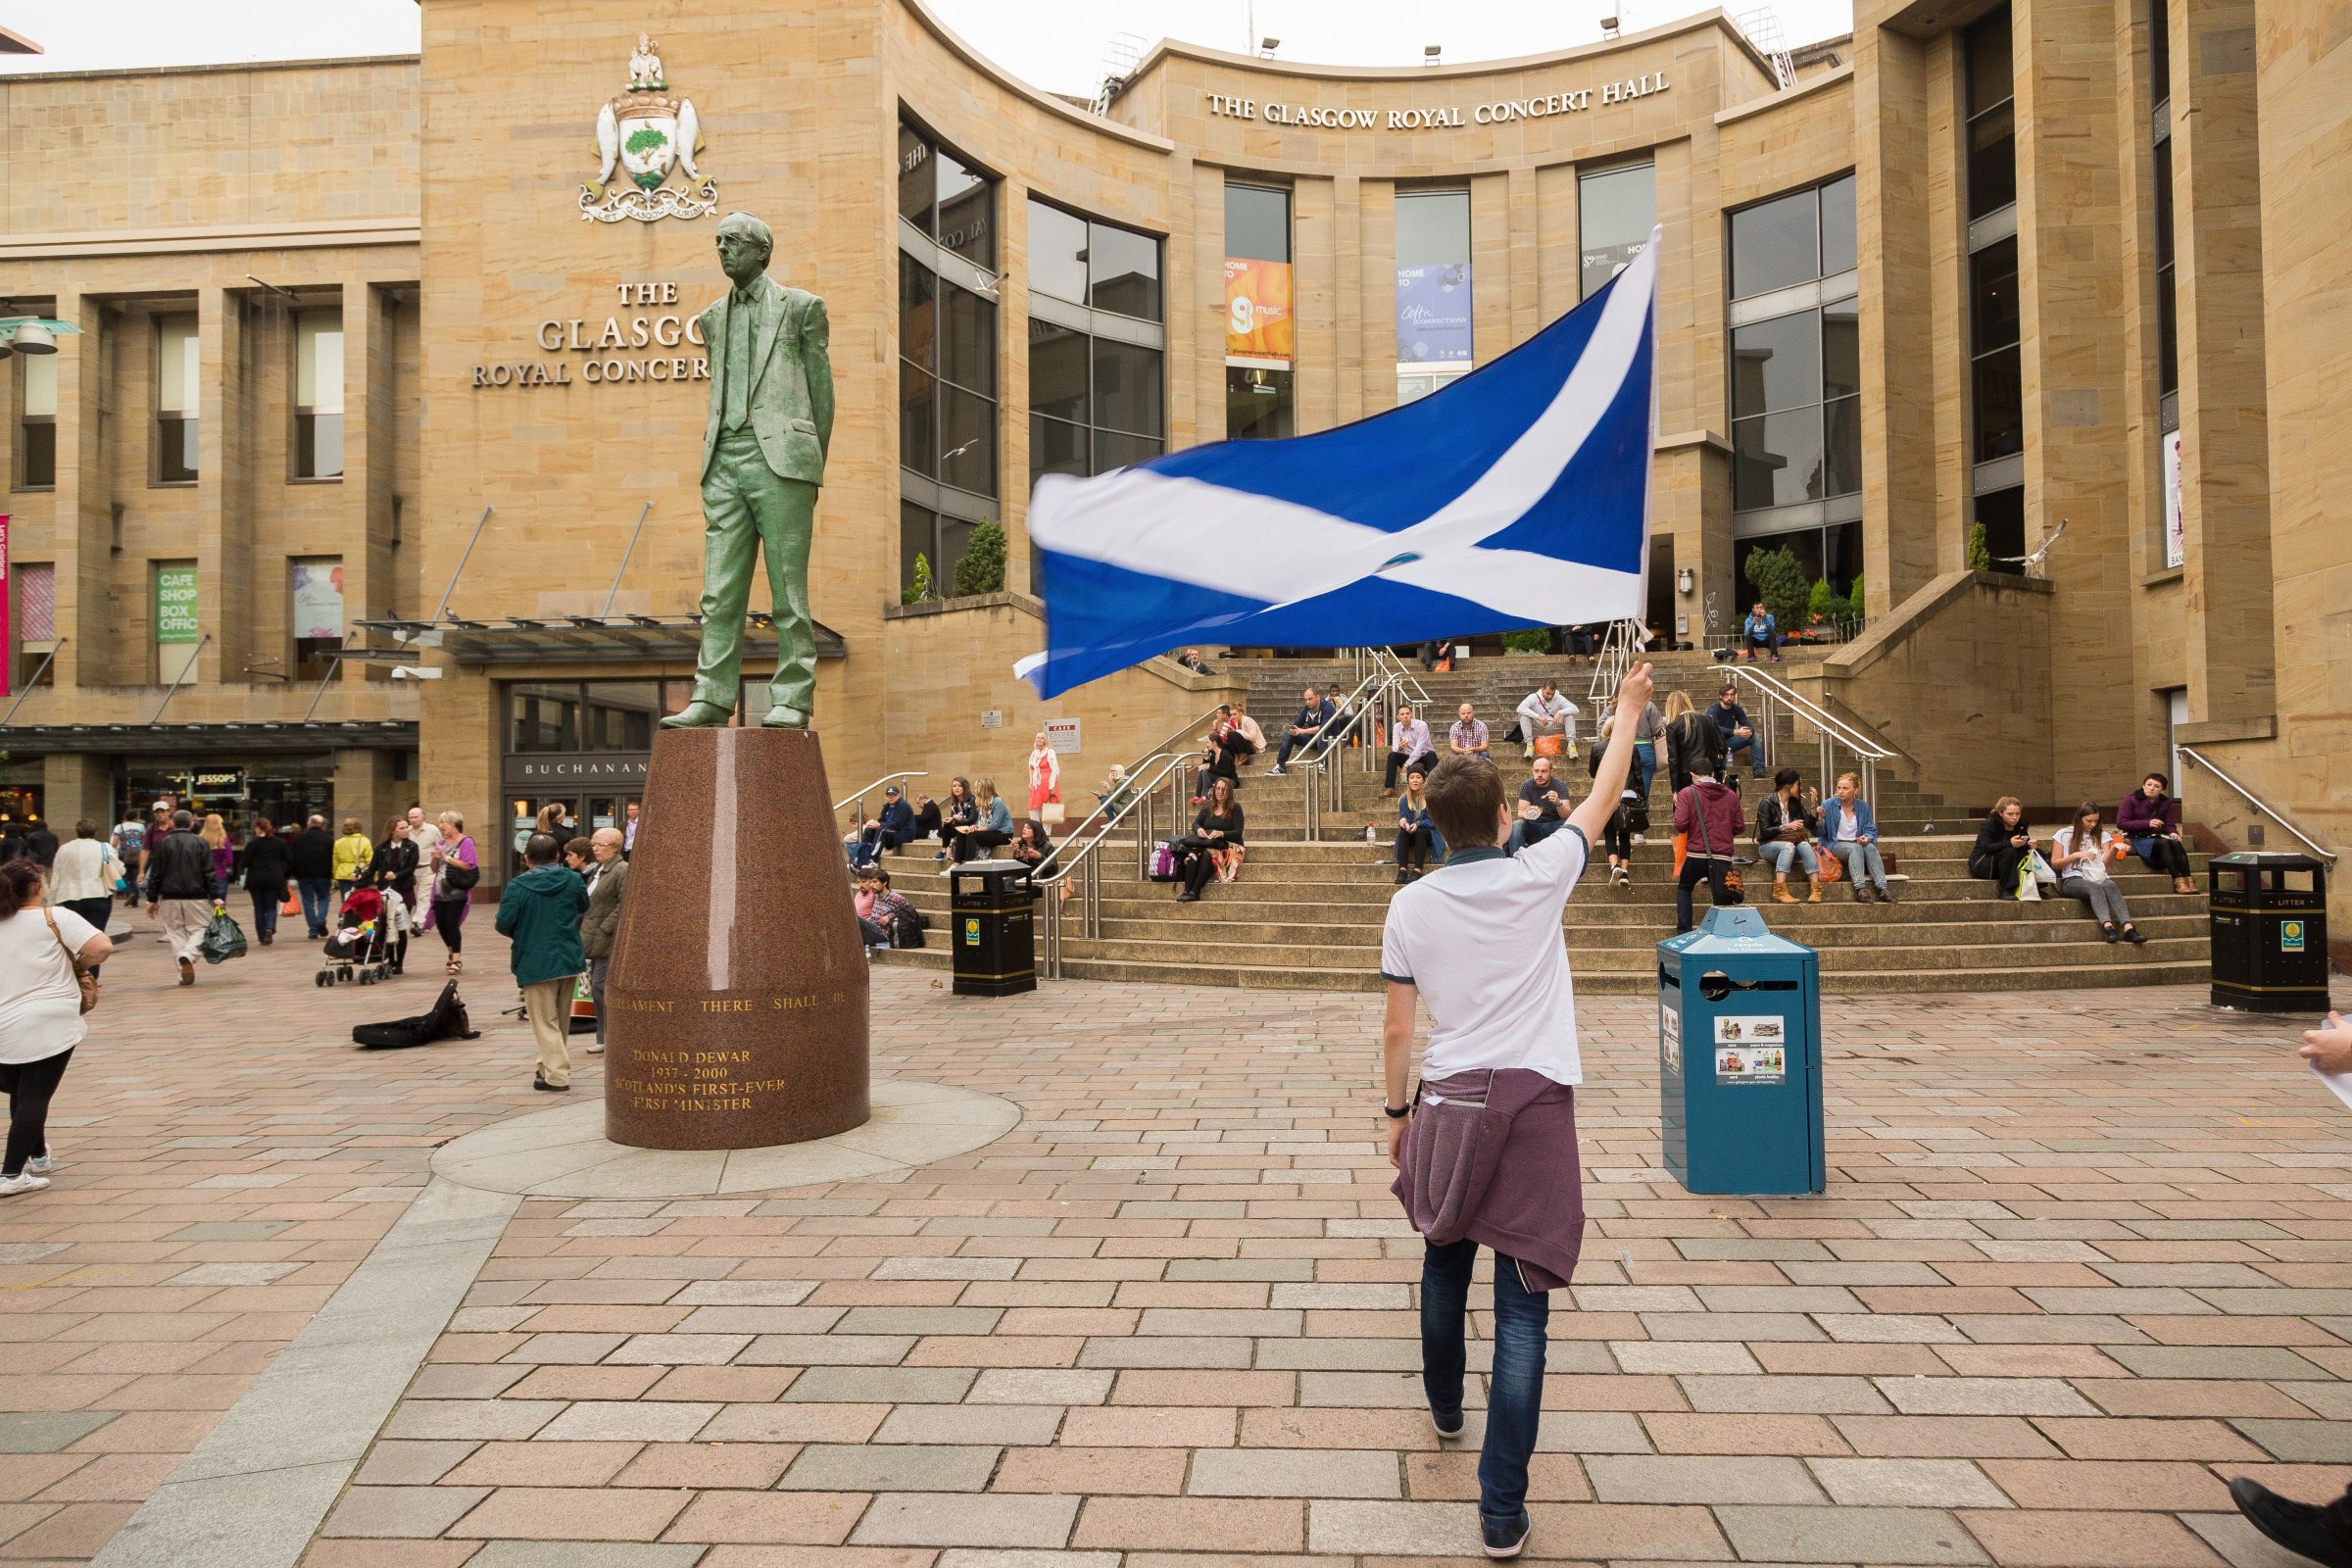 A Yes campaign supporter flies a large Scotland flag close to the statue of Donald Dewar in Buchanan Street on Sept. 4, 2014.